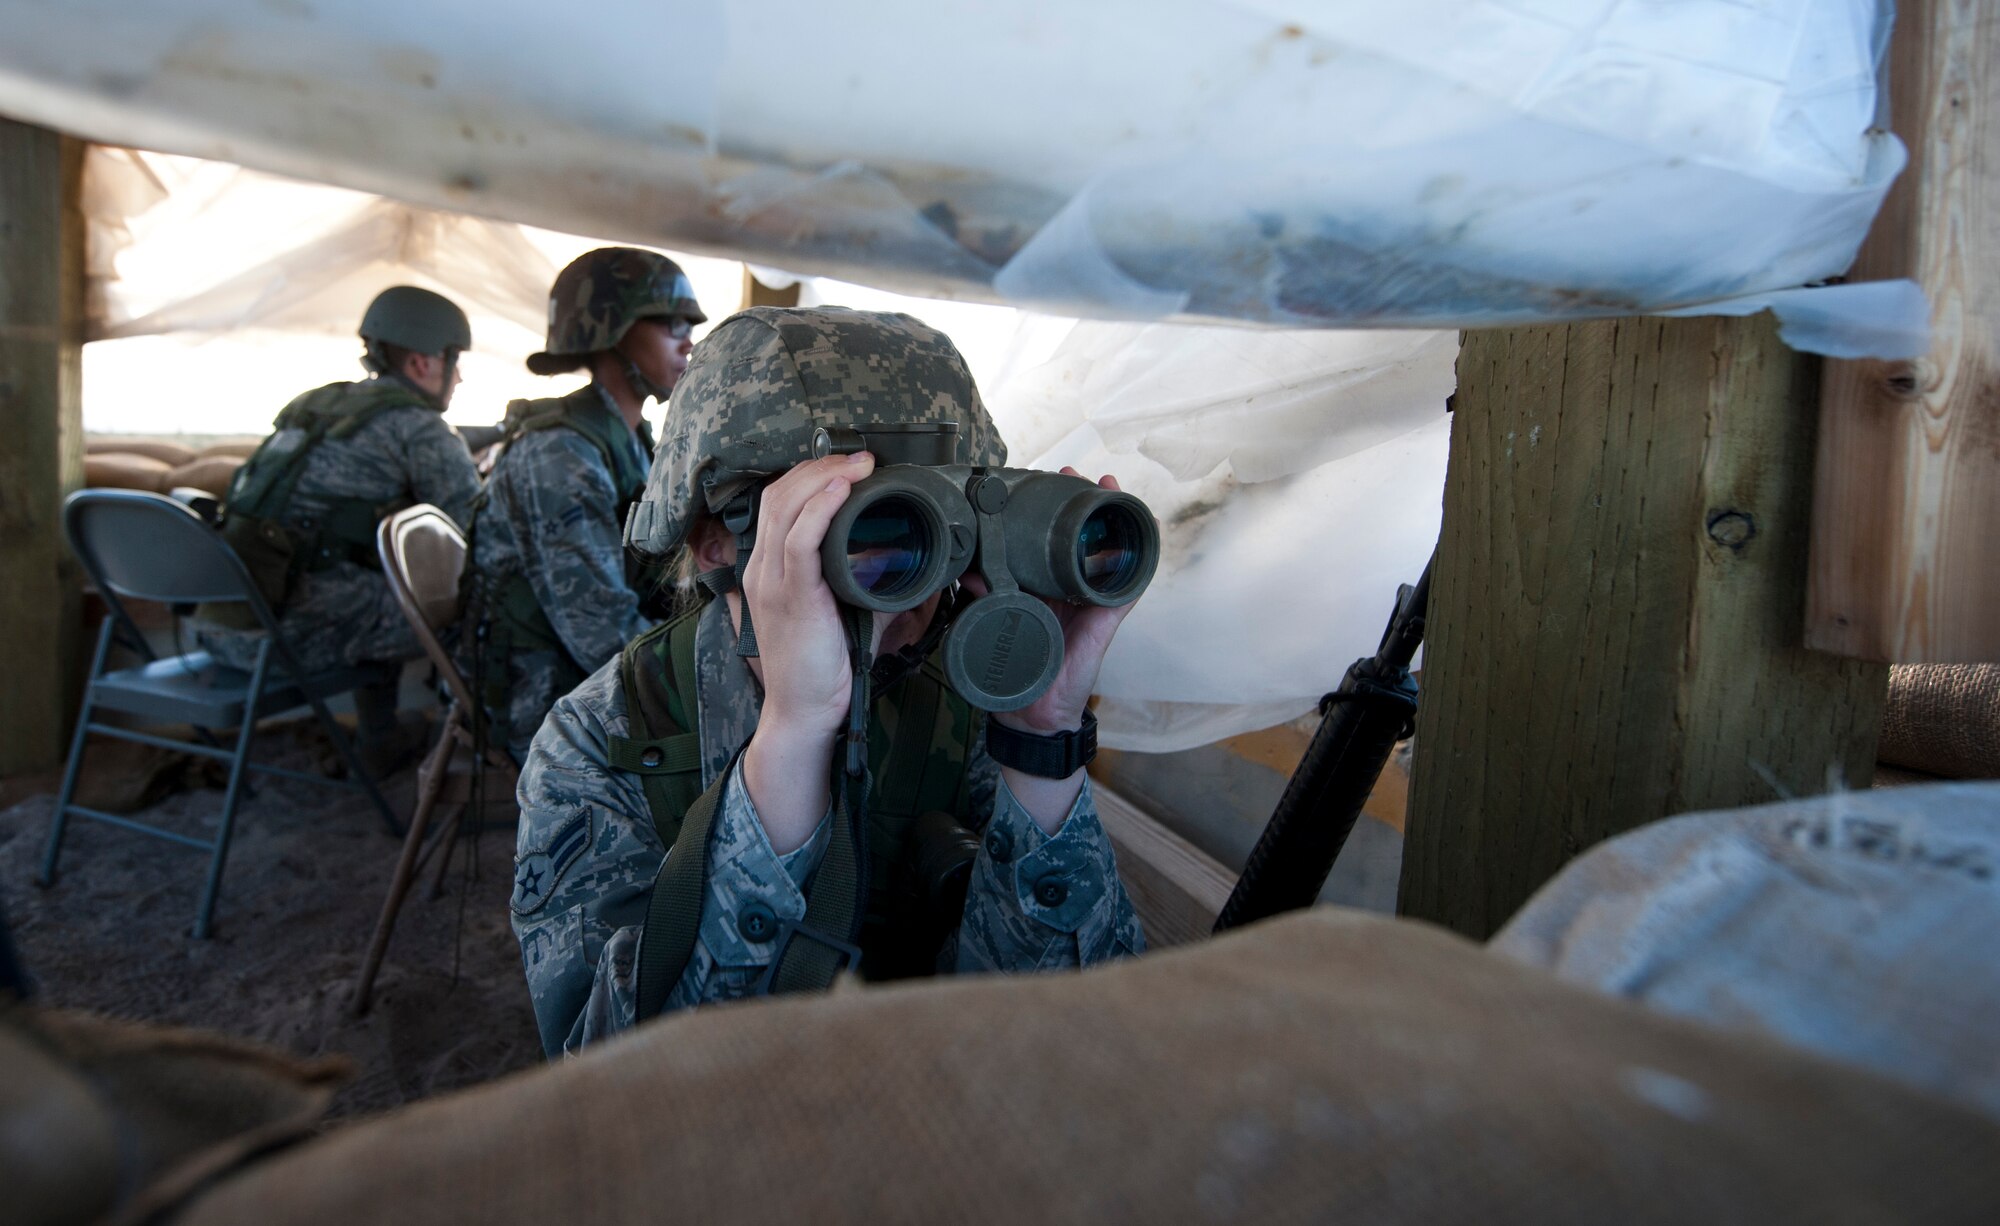 U.S. Air Force Airman 1st Class Courtney McFerrin, 726th Air Control Squadron command control battle management operations apprentice, looks through binoculars in a defensive fighting position Sept. 18, 2013, at Mountain Home Air Force Base, Idaho. Vigilance is a key component when providing base security. Airmen from the 726th ACS were given multiple scenarios to test their abilities in safe-guarding wingmen along with Air Force assets. (U.S. Air Force photo by Airman 1st Class Brittany A. Chase/Released)